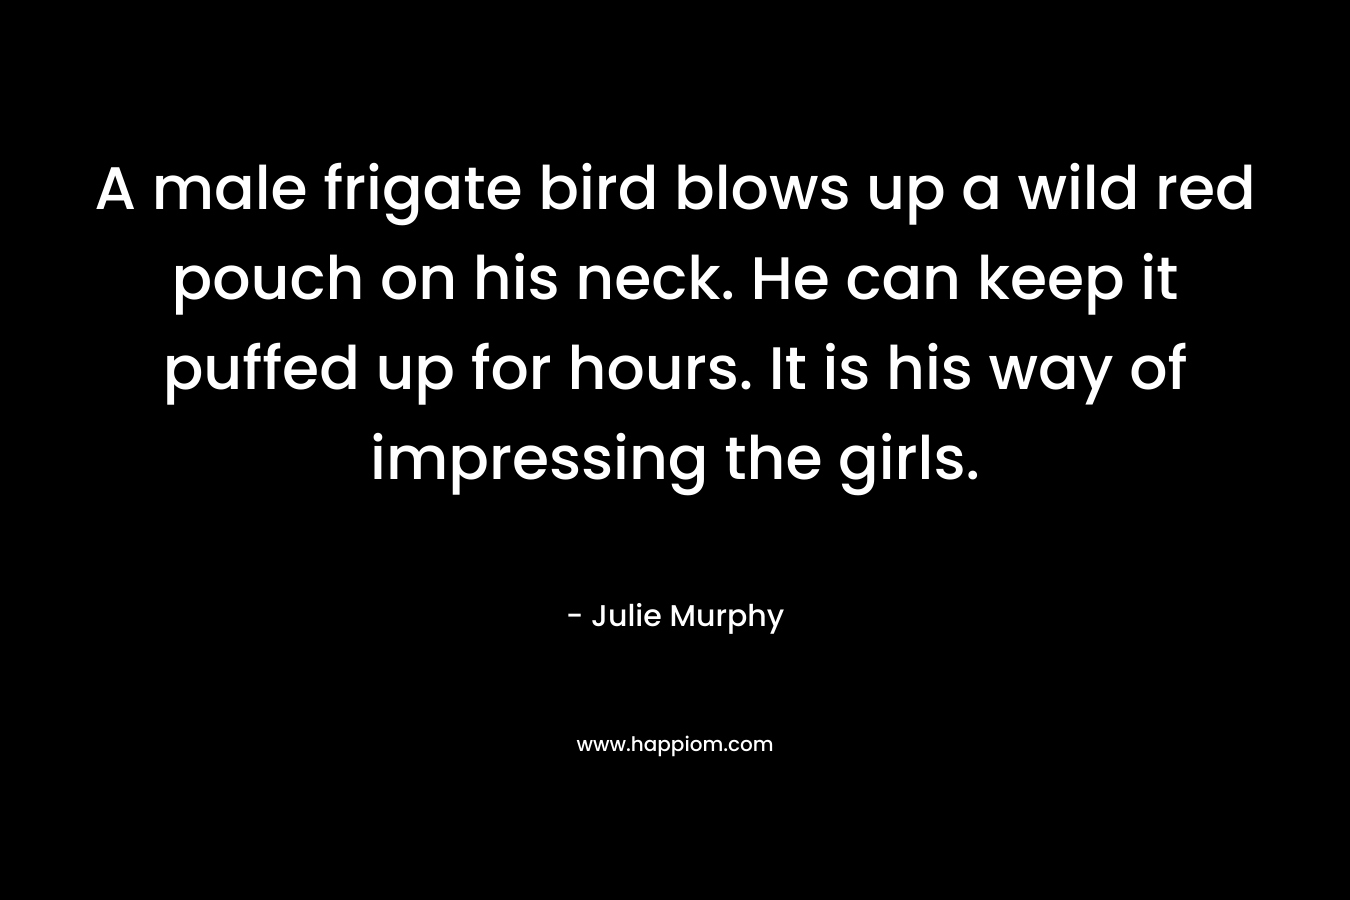 A male frigate bird blows up a wild red pouch on his neck. He can keep it puffed up for hours. It is his way of impressing the girls. – Julie  Murphy